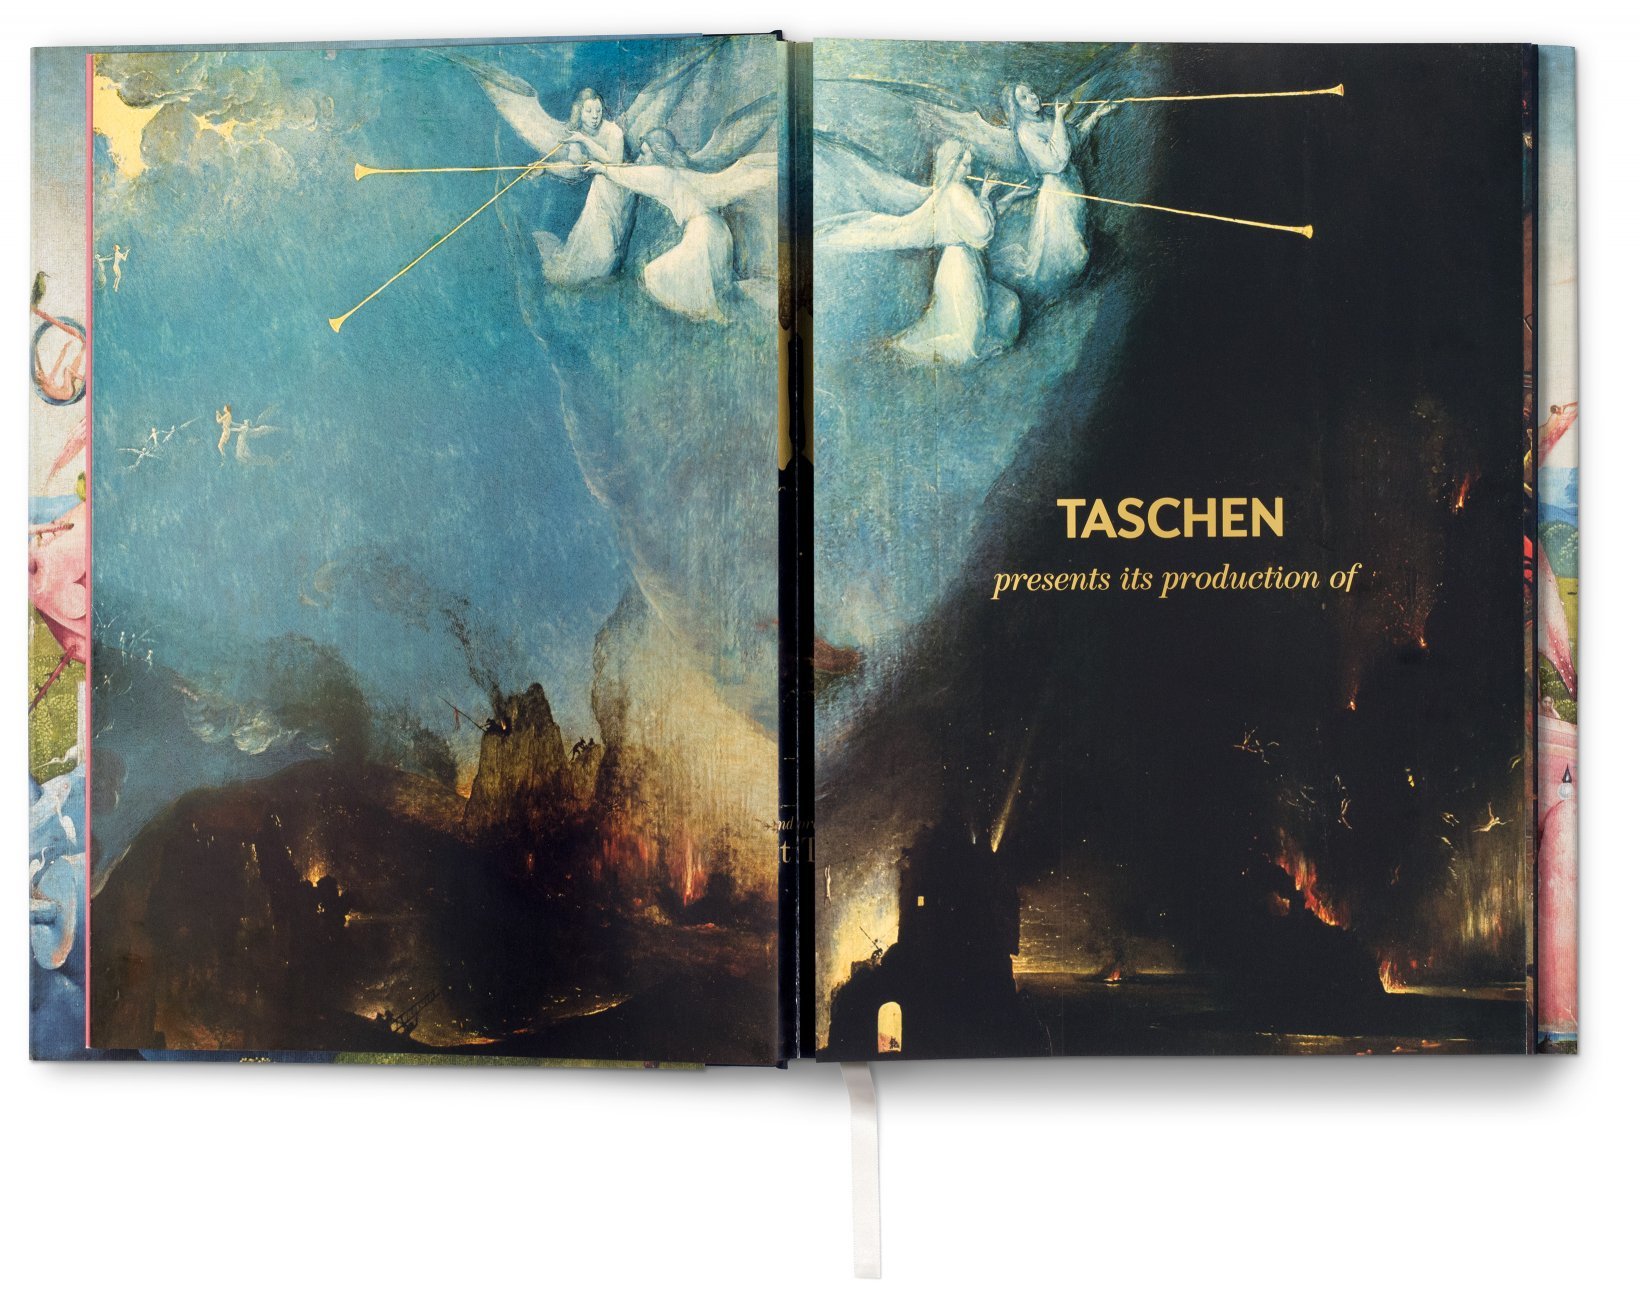 Artbook - Sách Tiếng Anh - Hieronymus Bosch. The complete works